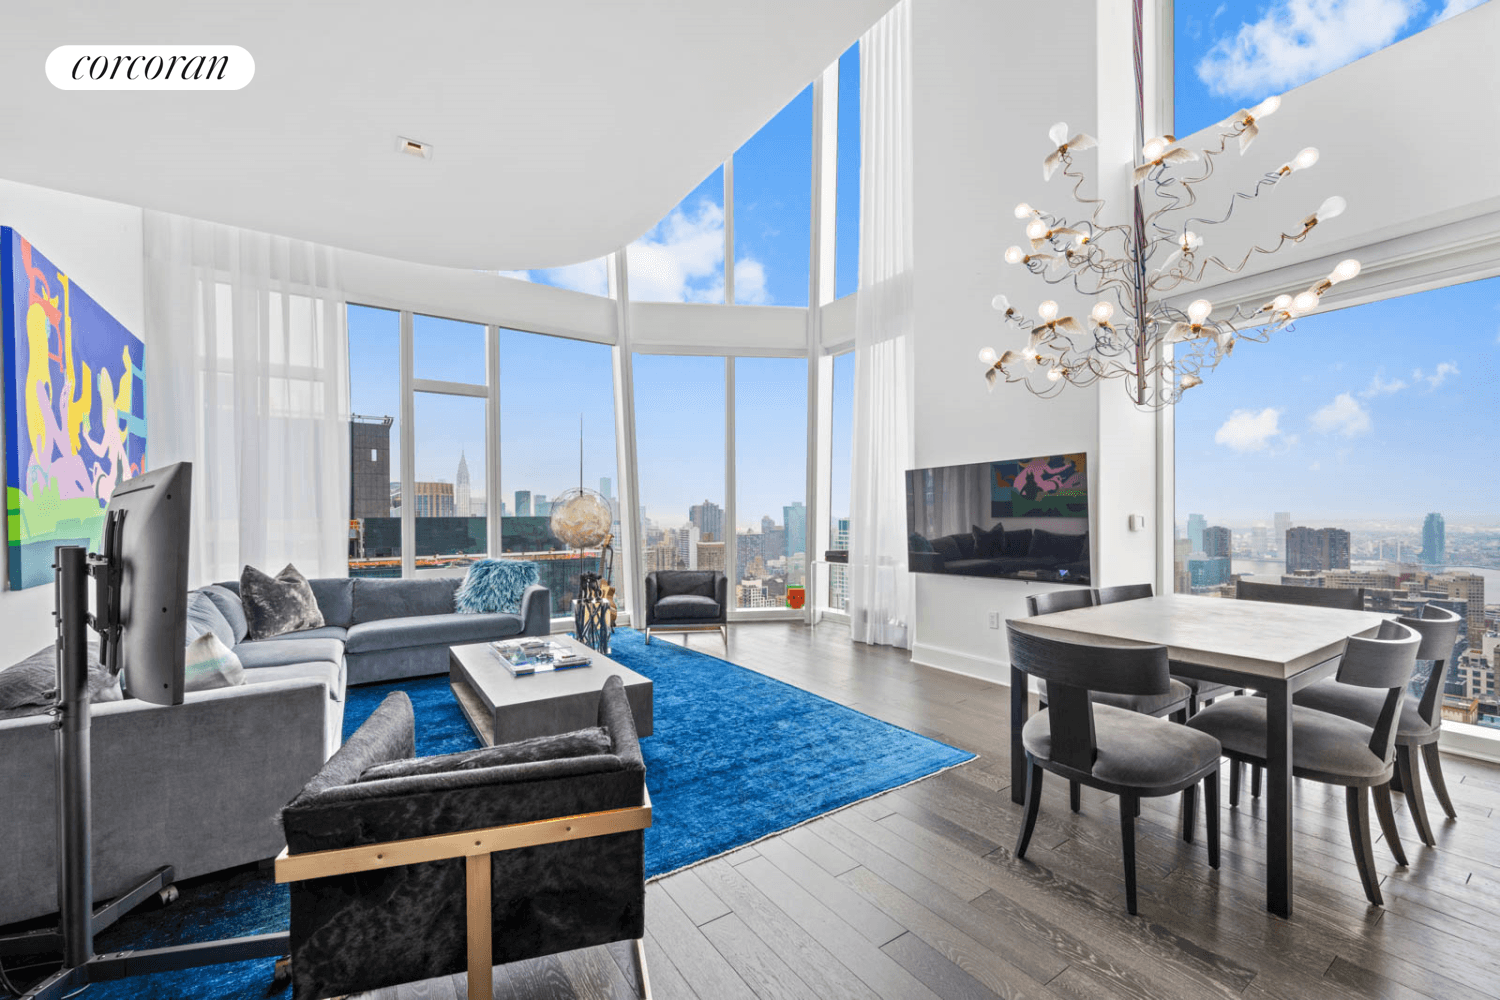 With airy 20 foot ceilings, this 2 bed, 2 bath with office trophy property on the 42nd floor captures sensational helicopter views facing North, East and South.